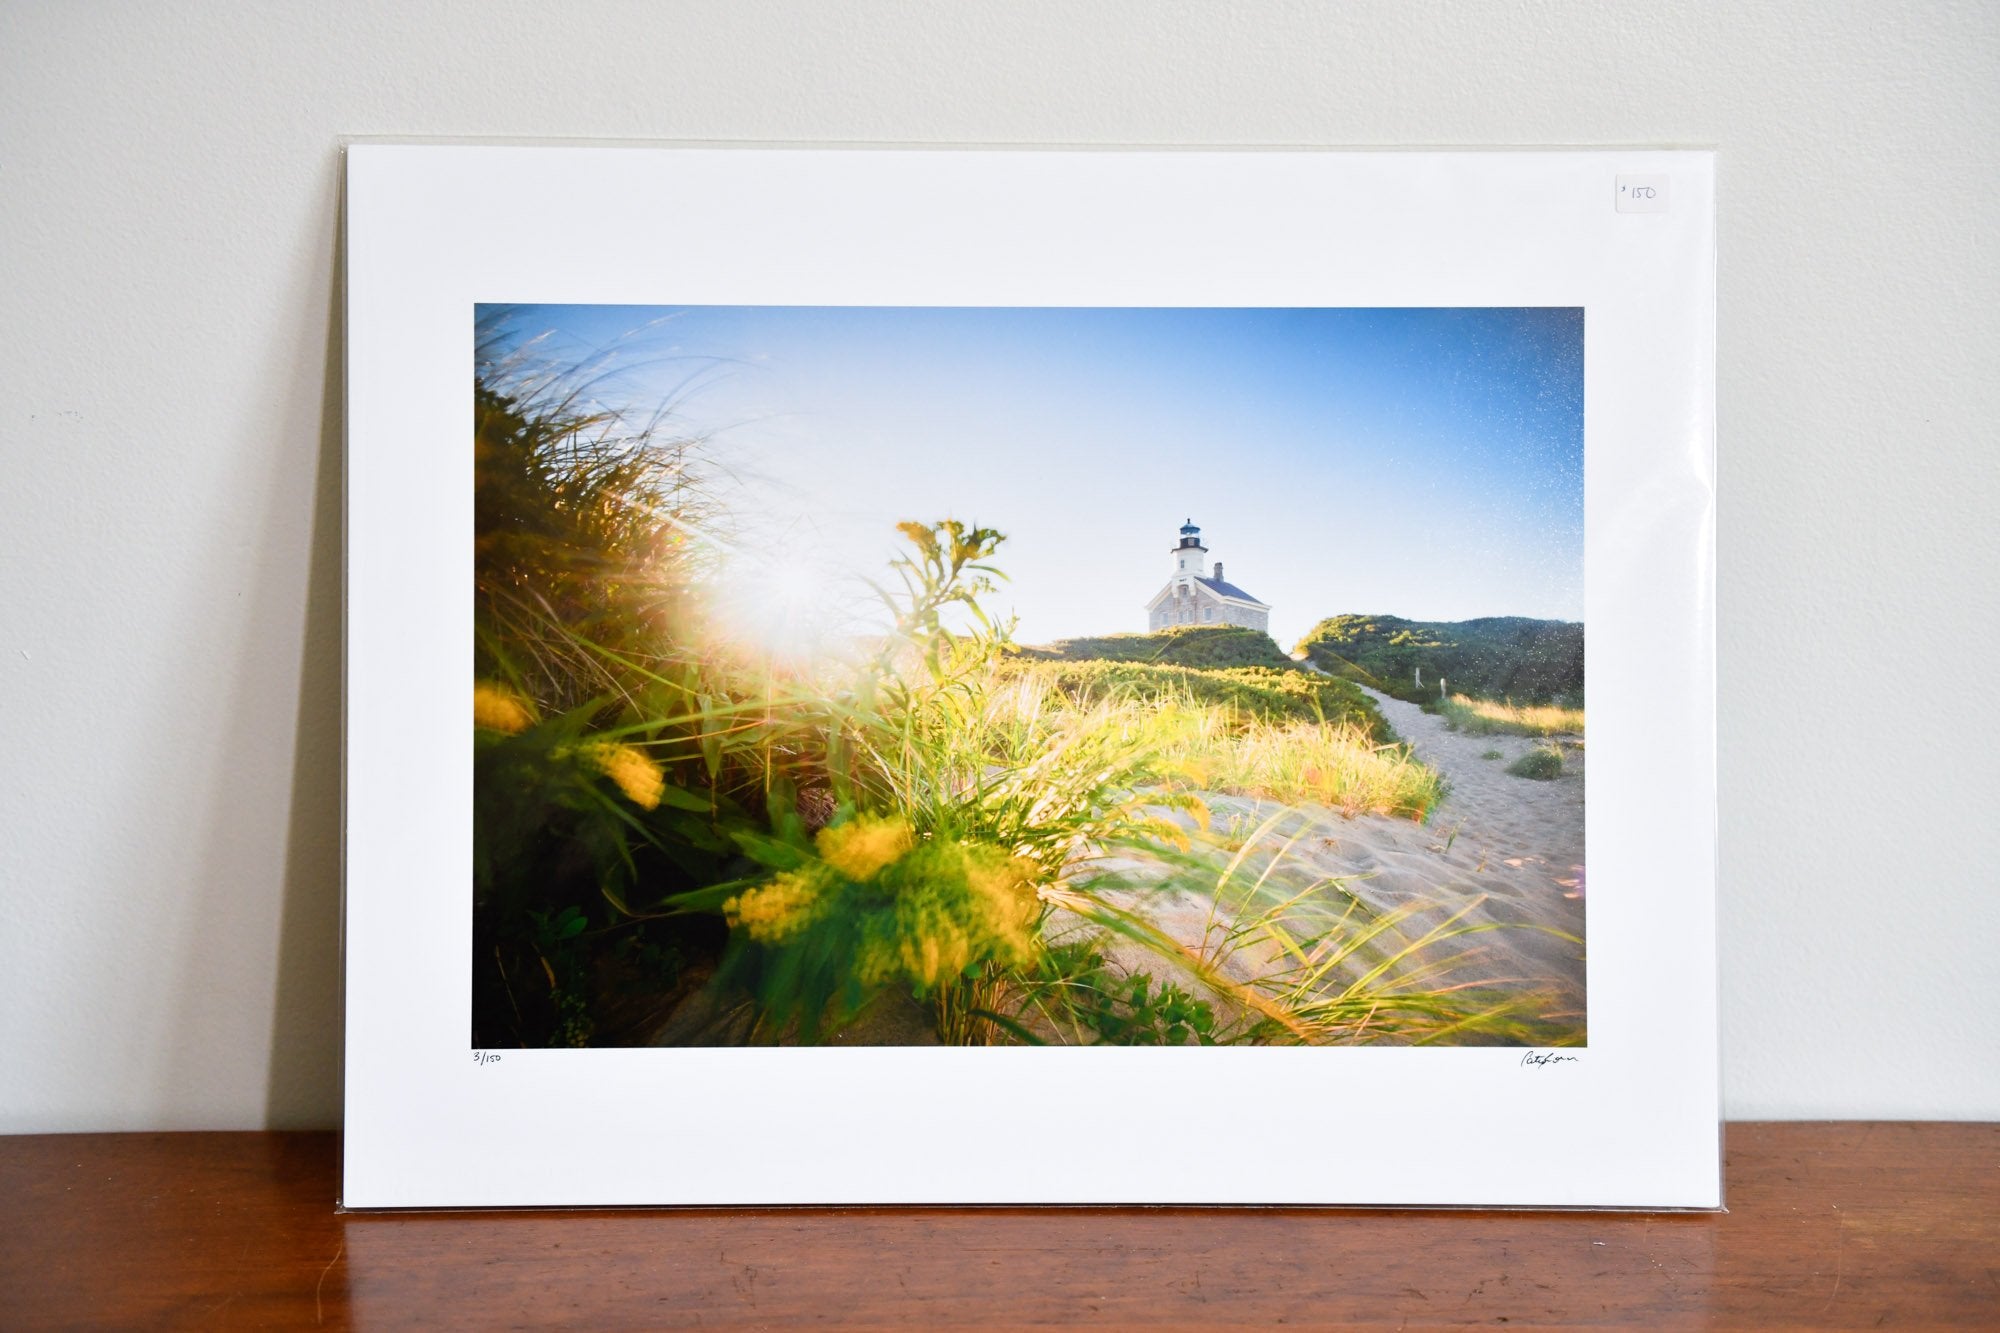 Cate Brown Photo North Light at Morning #2 // Fine Art Print 12x18" // Limited Edition 3 of 150 Available Inventory Ocean Fine Art